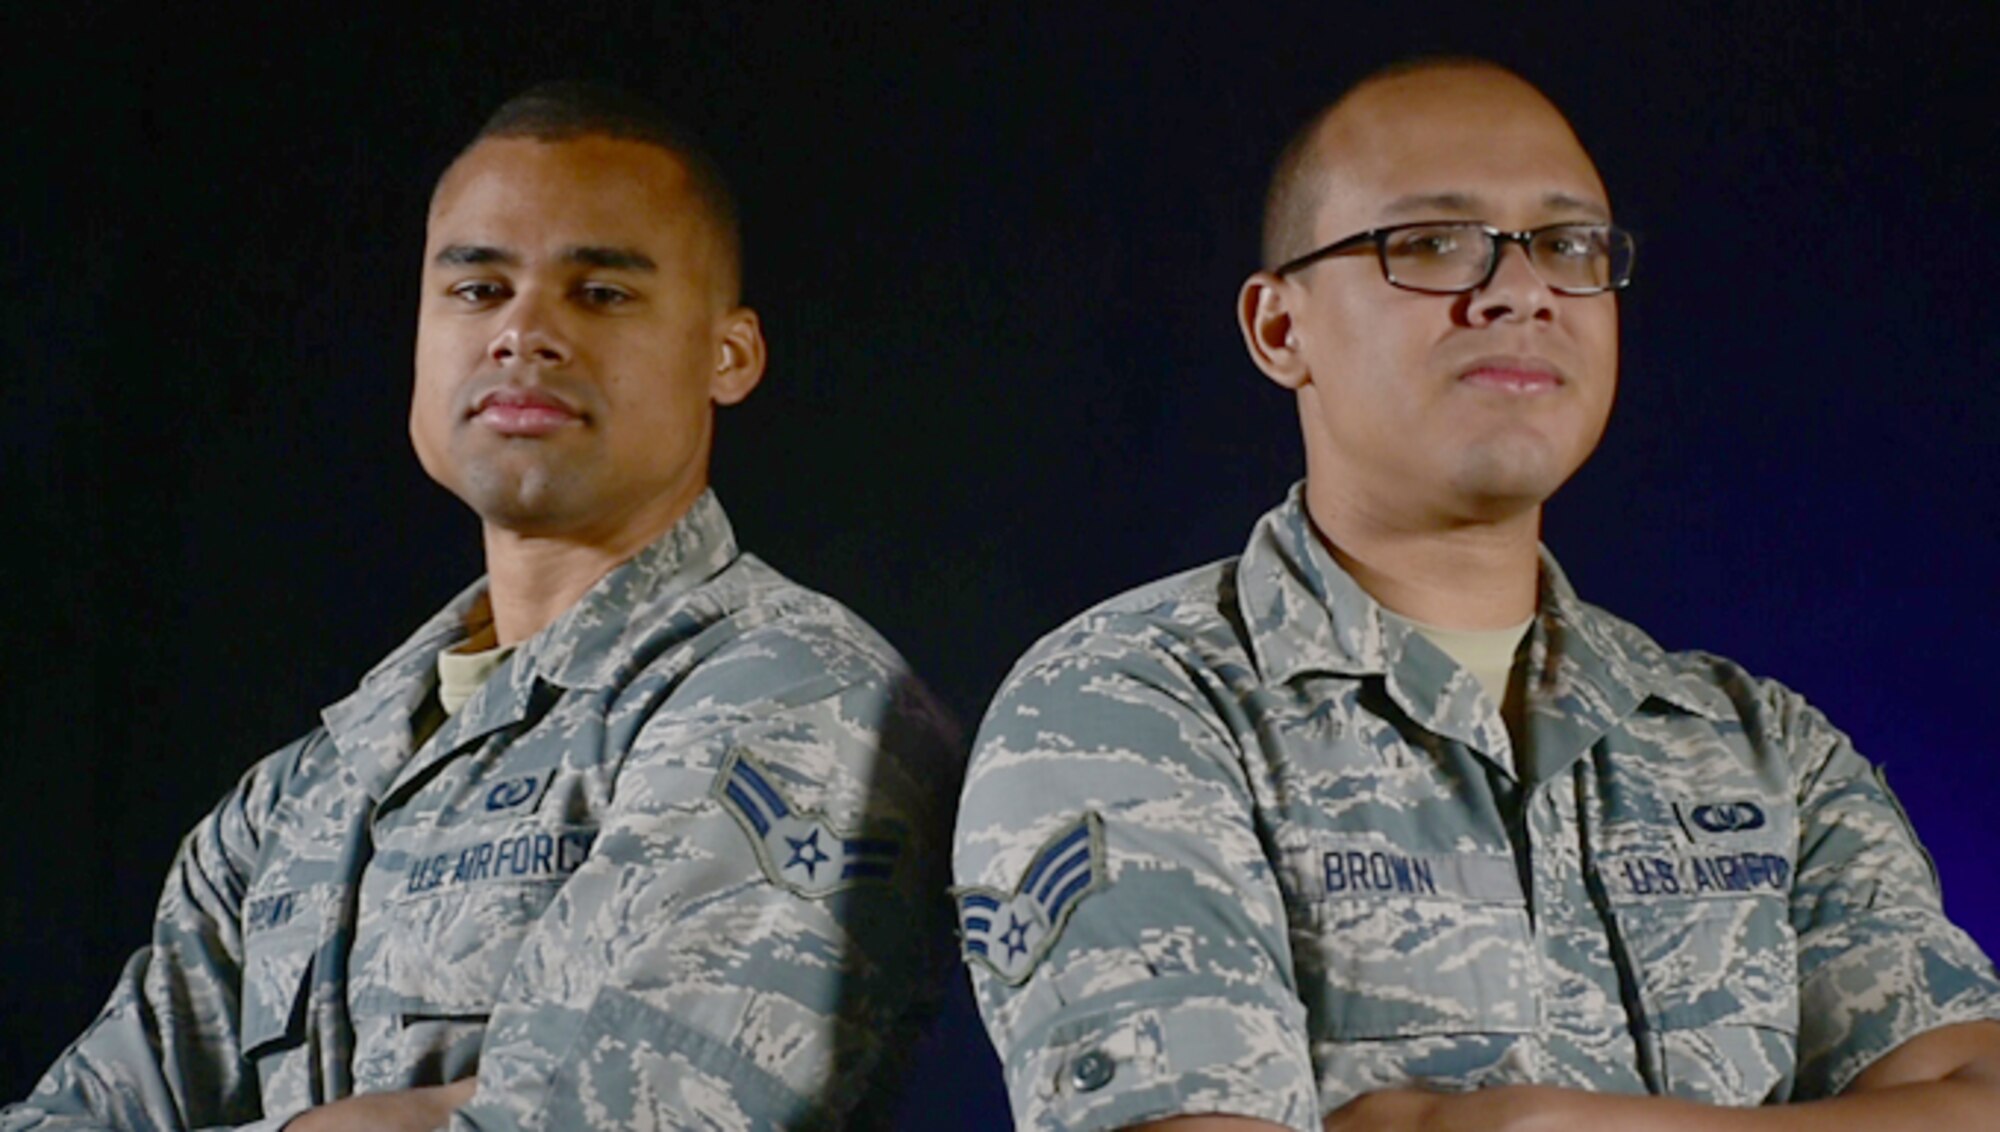 Two brothers born and raised at Luke AFB, assigned to the 310th and 62nd fighter squadrons, tell their story about brotherhood, service, and sacrifice.